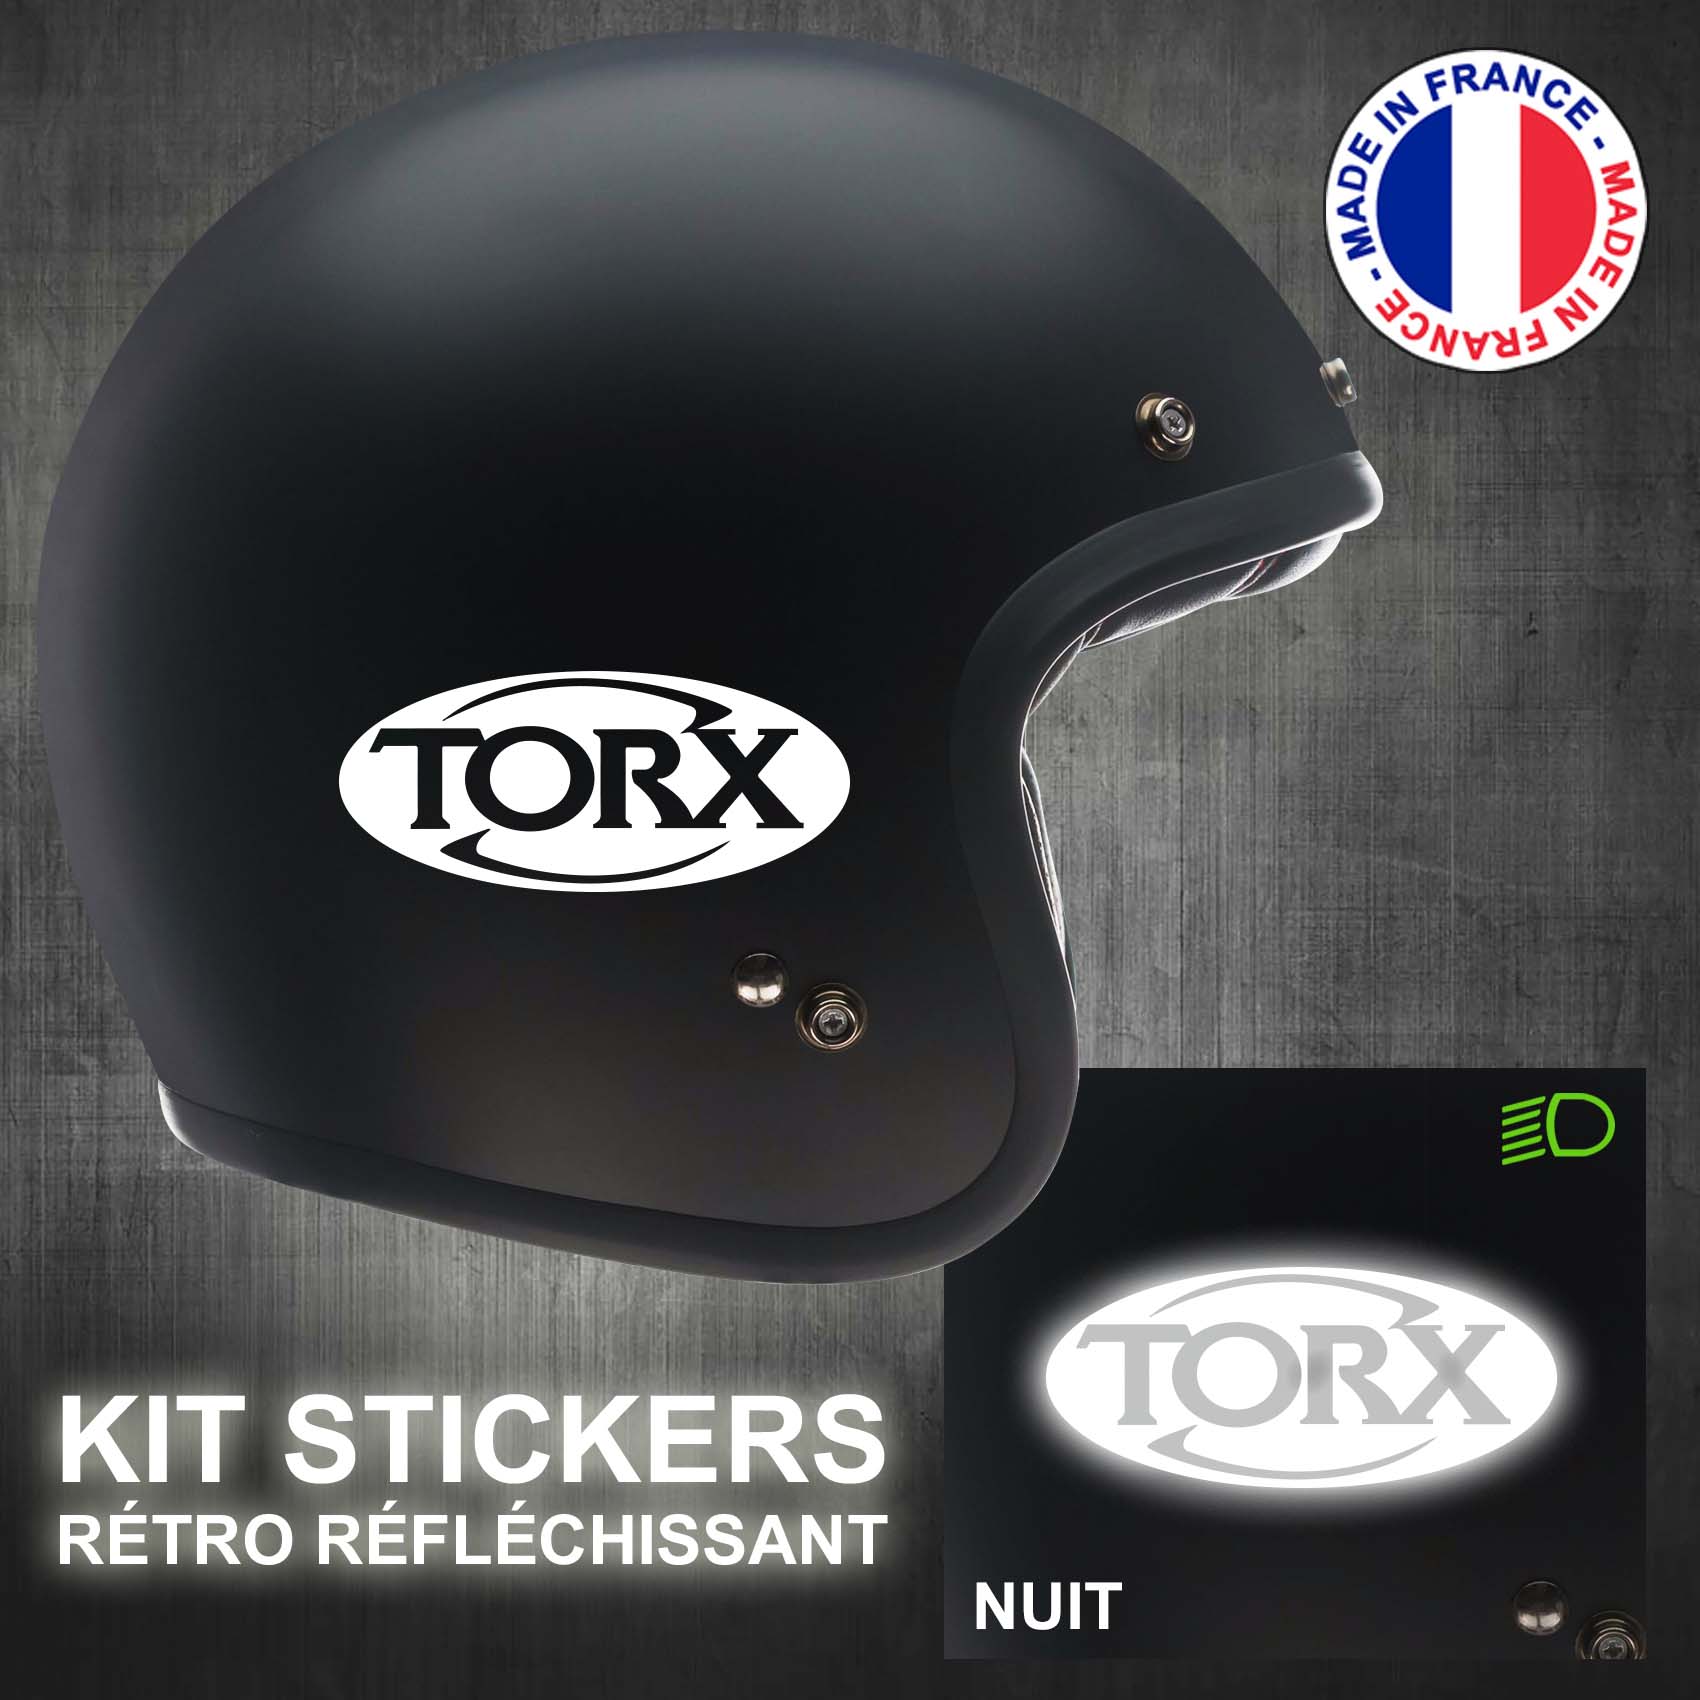 stickers-casque-moto-torx-ref1-retro-reflechissant-autocollant-noir-moto-velo-tuning-racing-route-sticker-casques-adhesif-scooter-nuit-securite-decals-personnalise-personnalisable-min